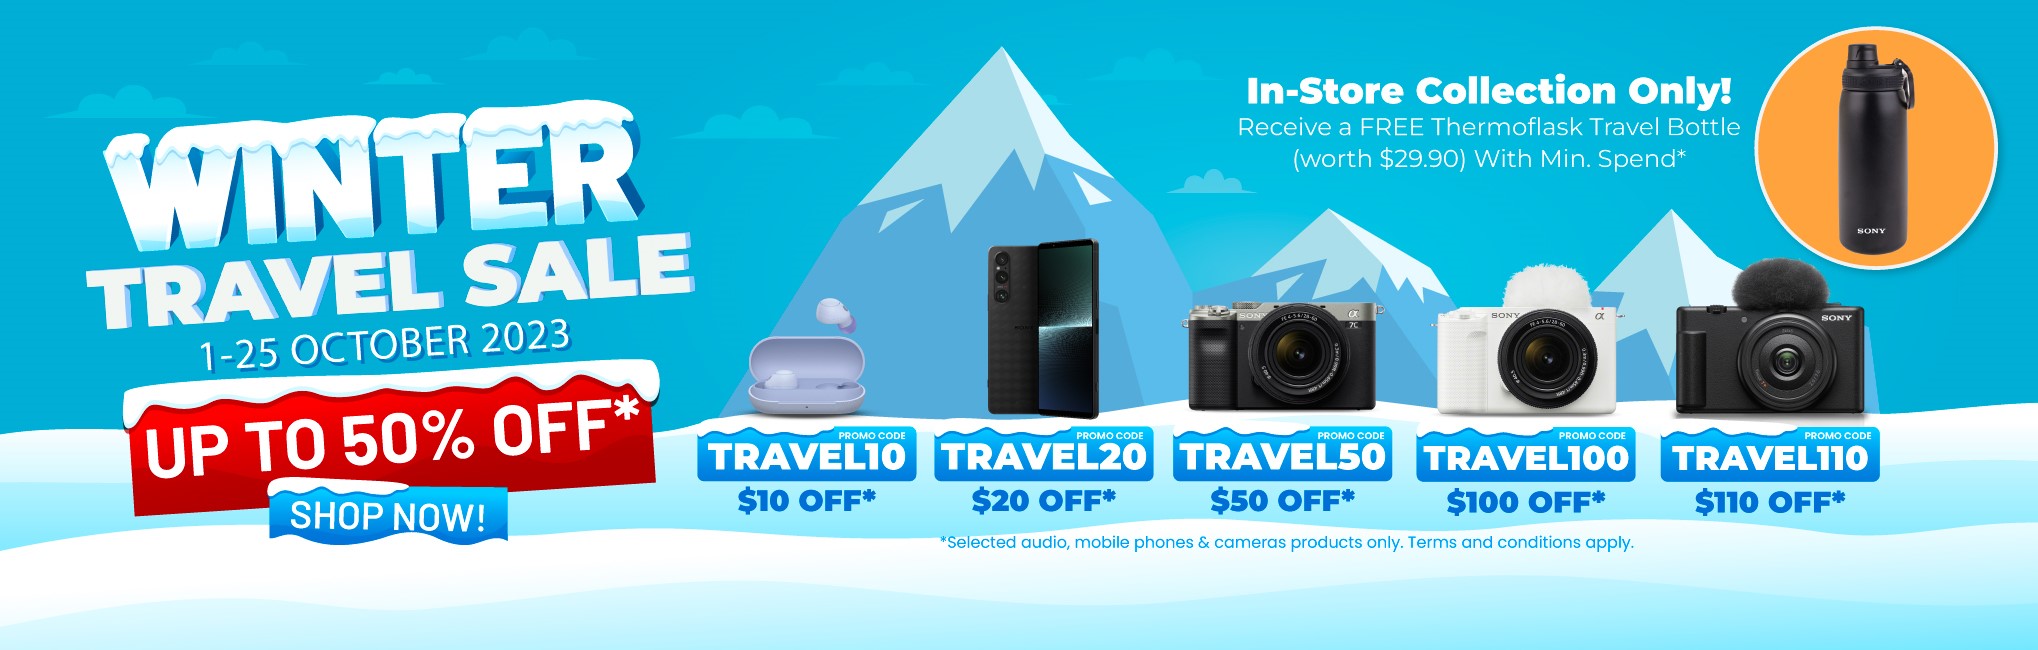 Sony Store Online Singapore  SSO Winter Travel Promotion 2023 (1